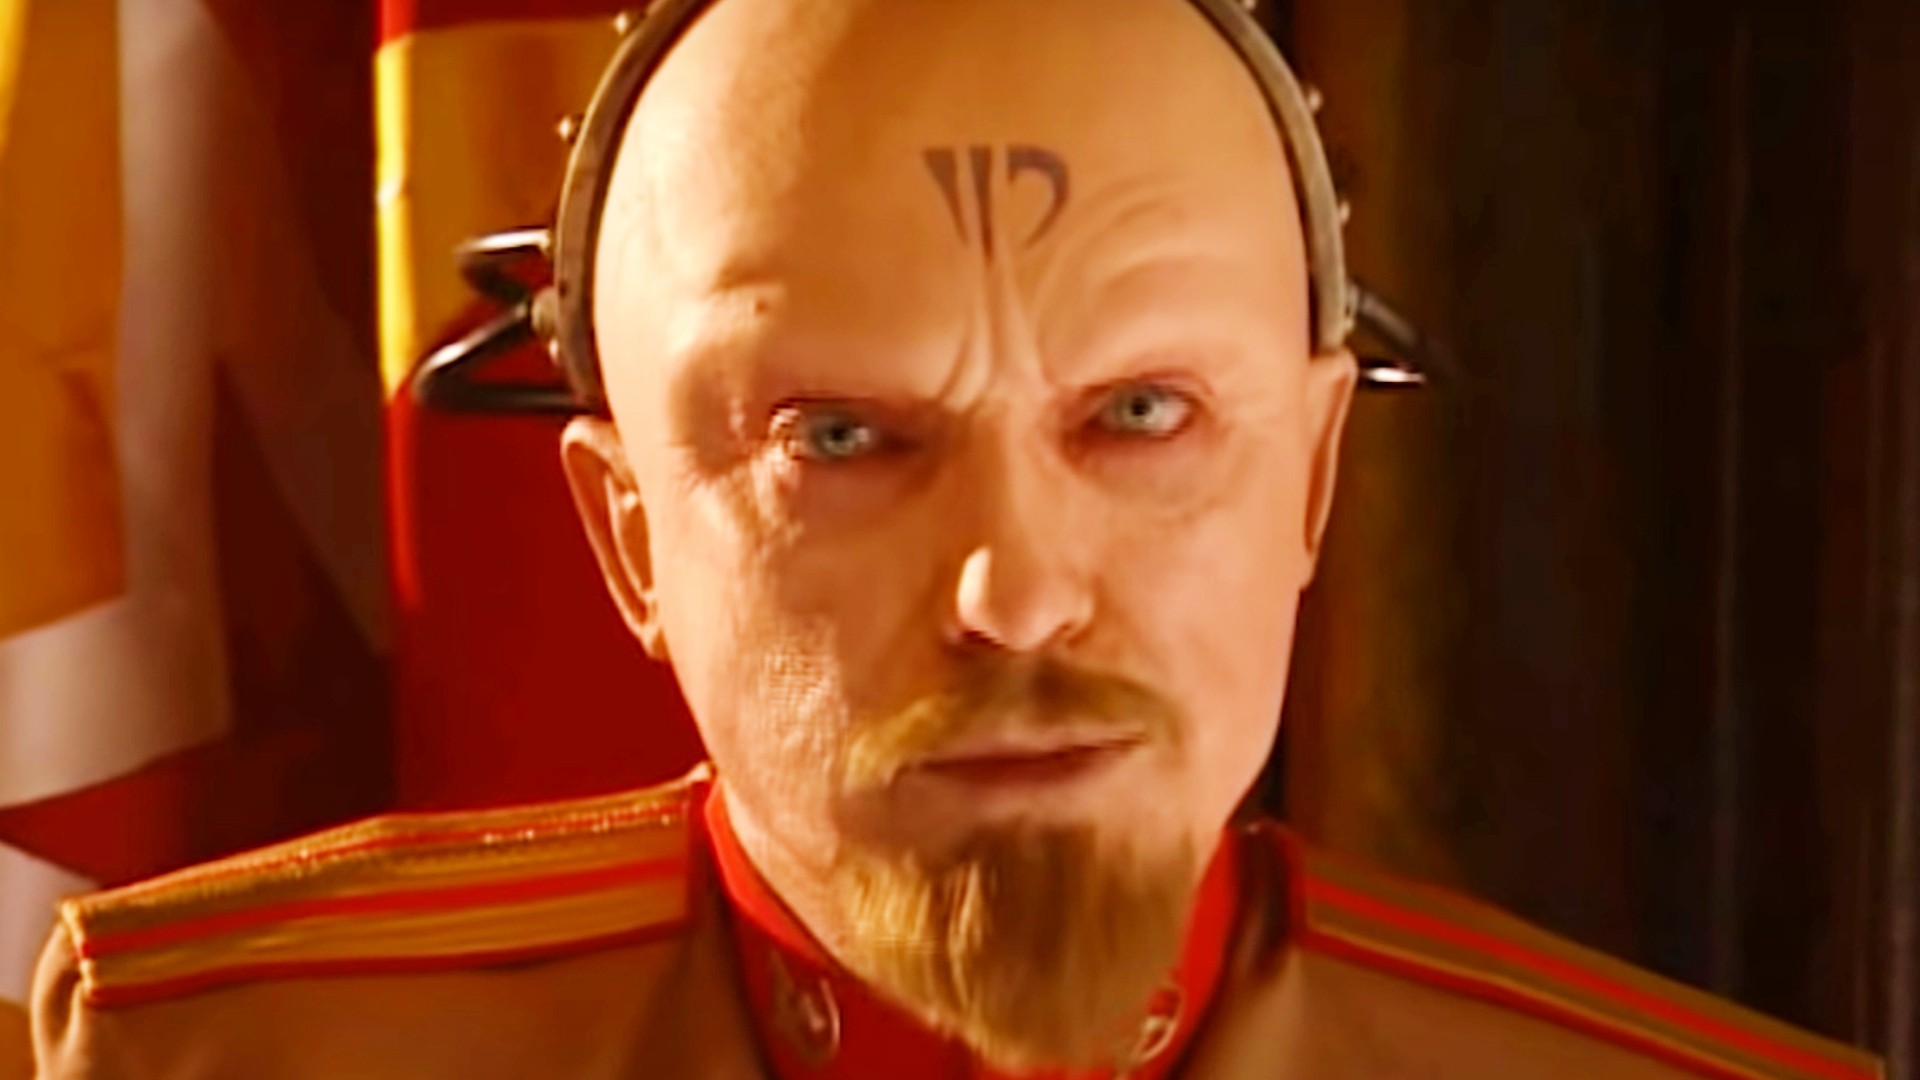 Command and Conquer Red Alert is back, in the saddest way possible